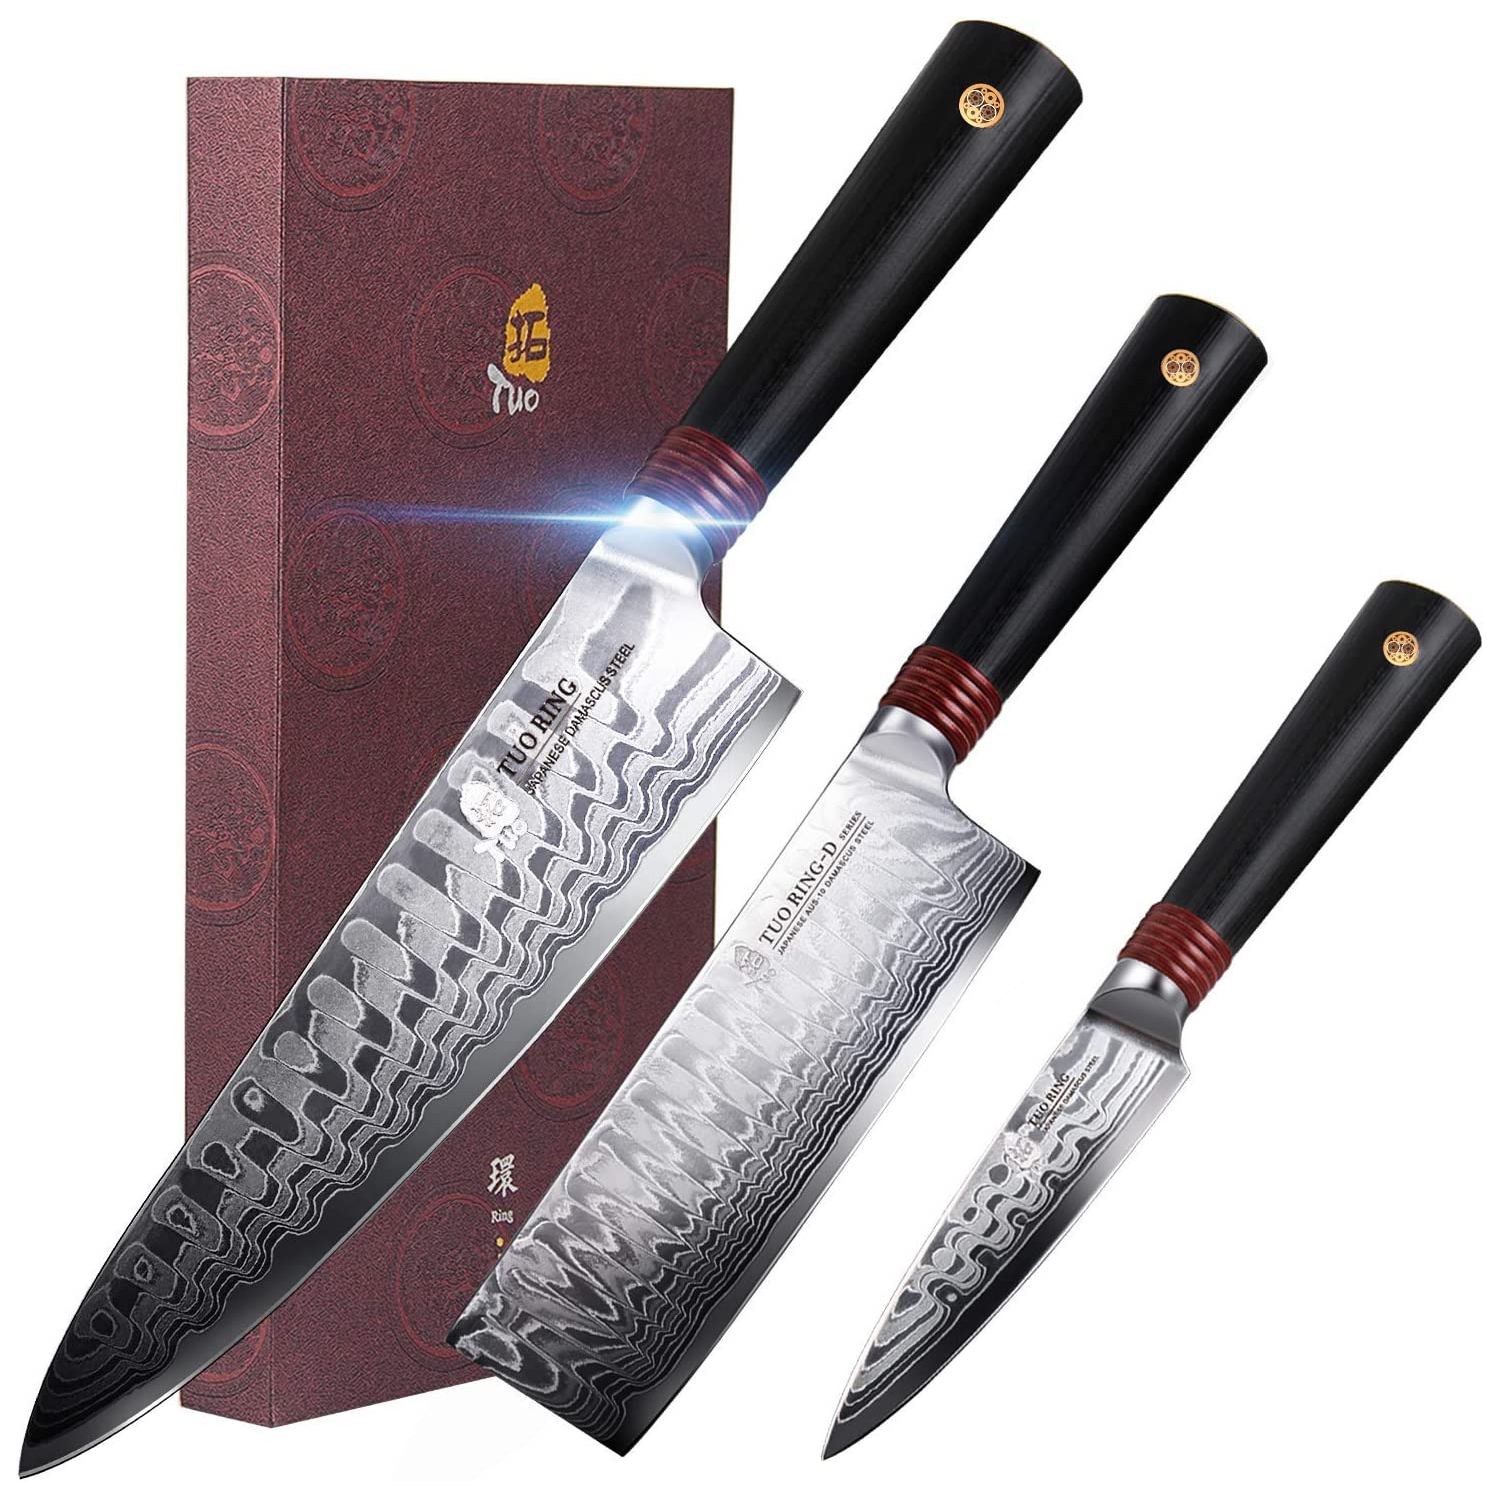 TUO Damascus Kitchen Knife Set of 3 Pieces: 8" Chef Knife, 6.5" Nakiri Knife, and 3.5" Paring Knife. Japanese AUS-10 High Carbon Stainless Steel, Full Tang G10 Handle - Gift Box